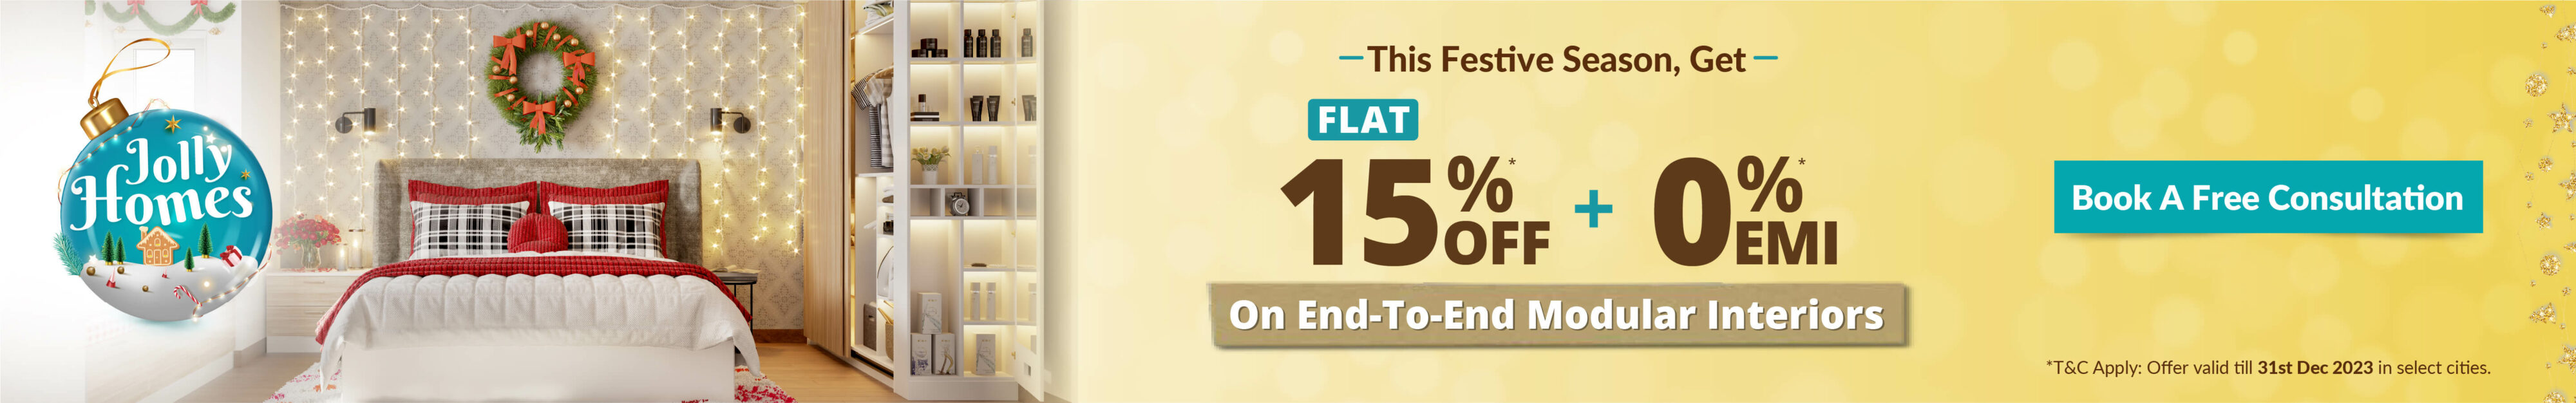 Home interiors offered by DesignCafe: FLAT 15% OFF + 0% EMI